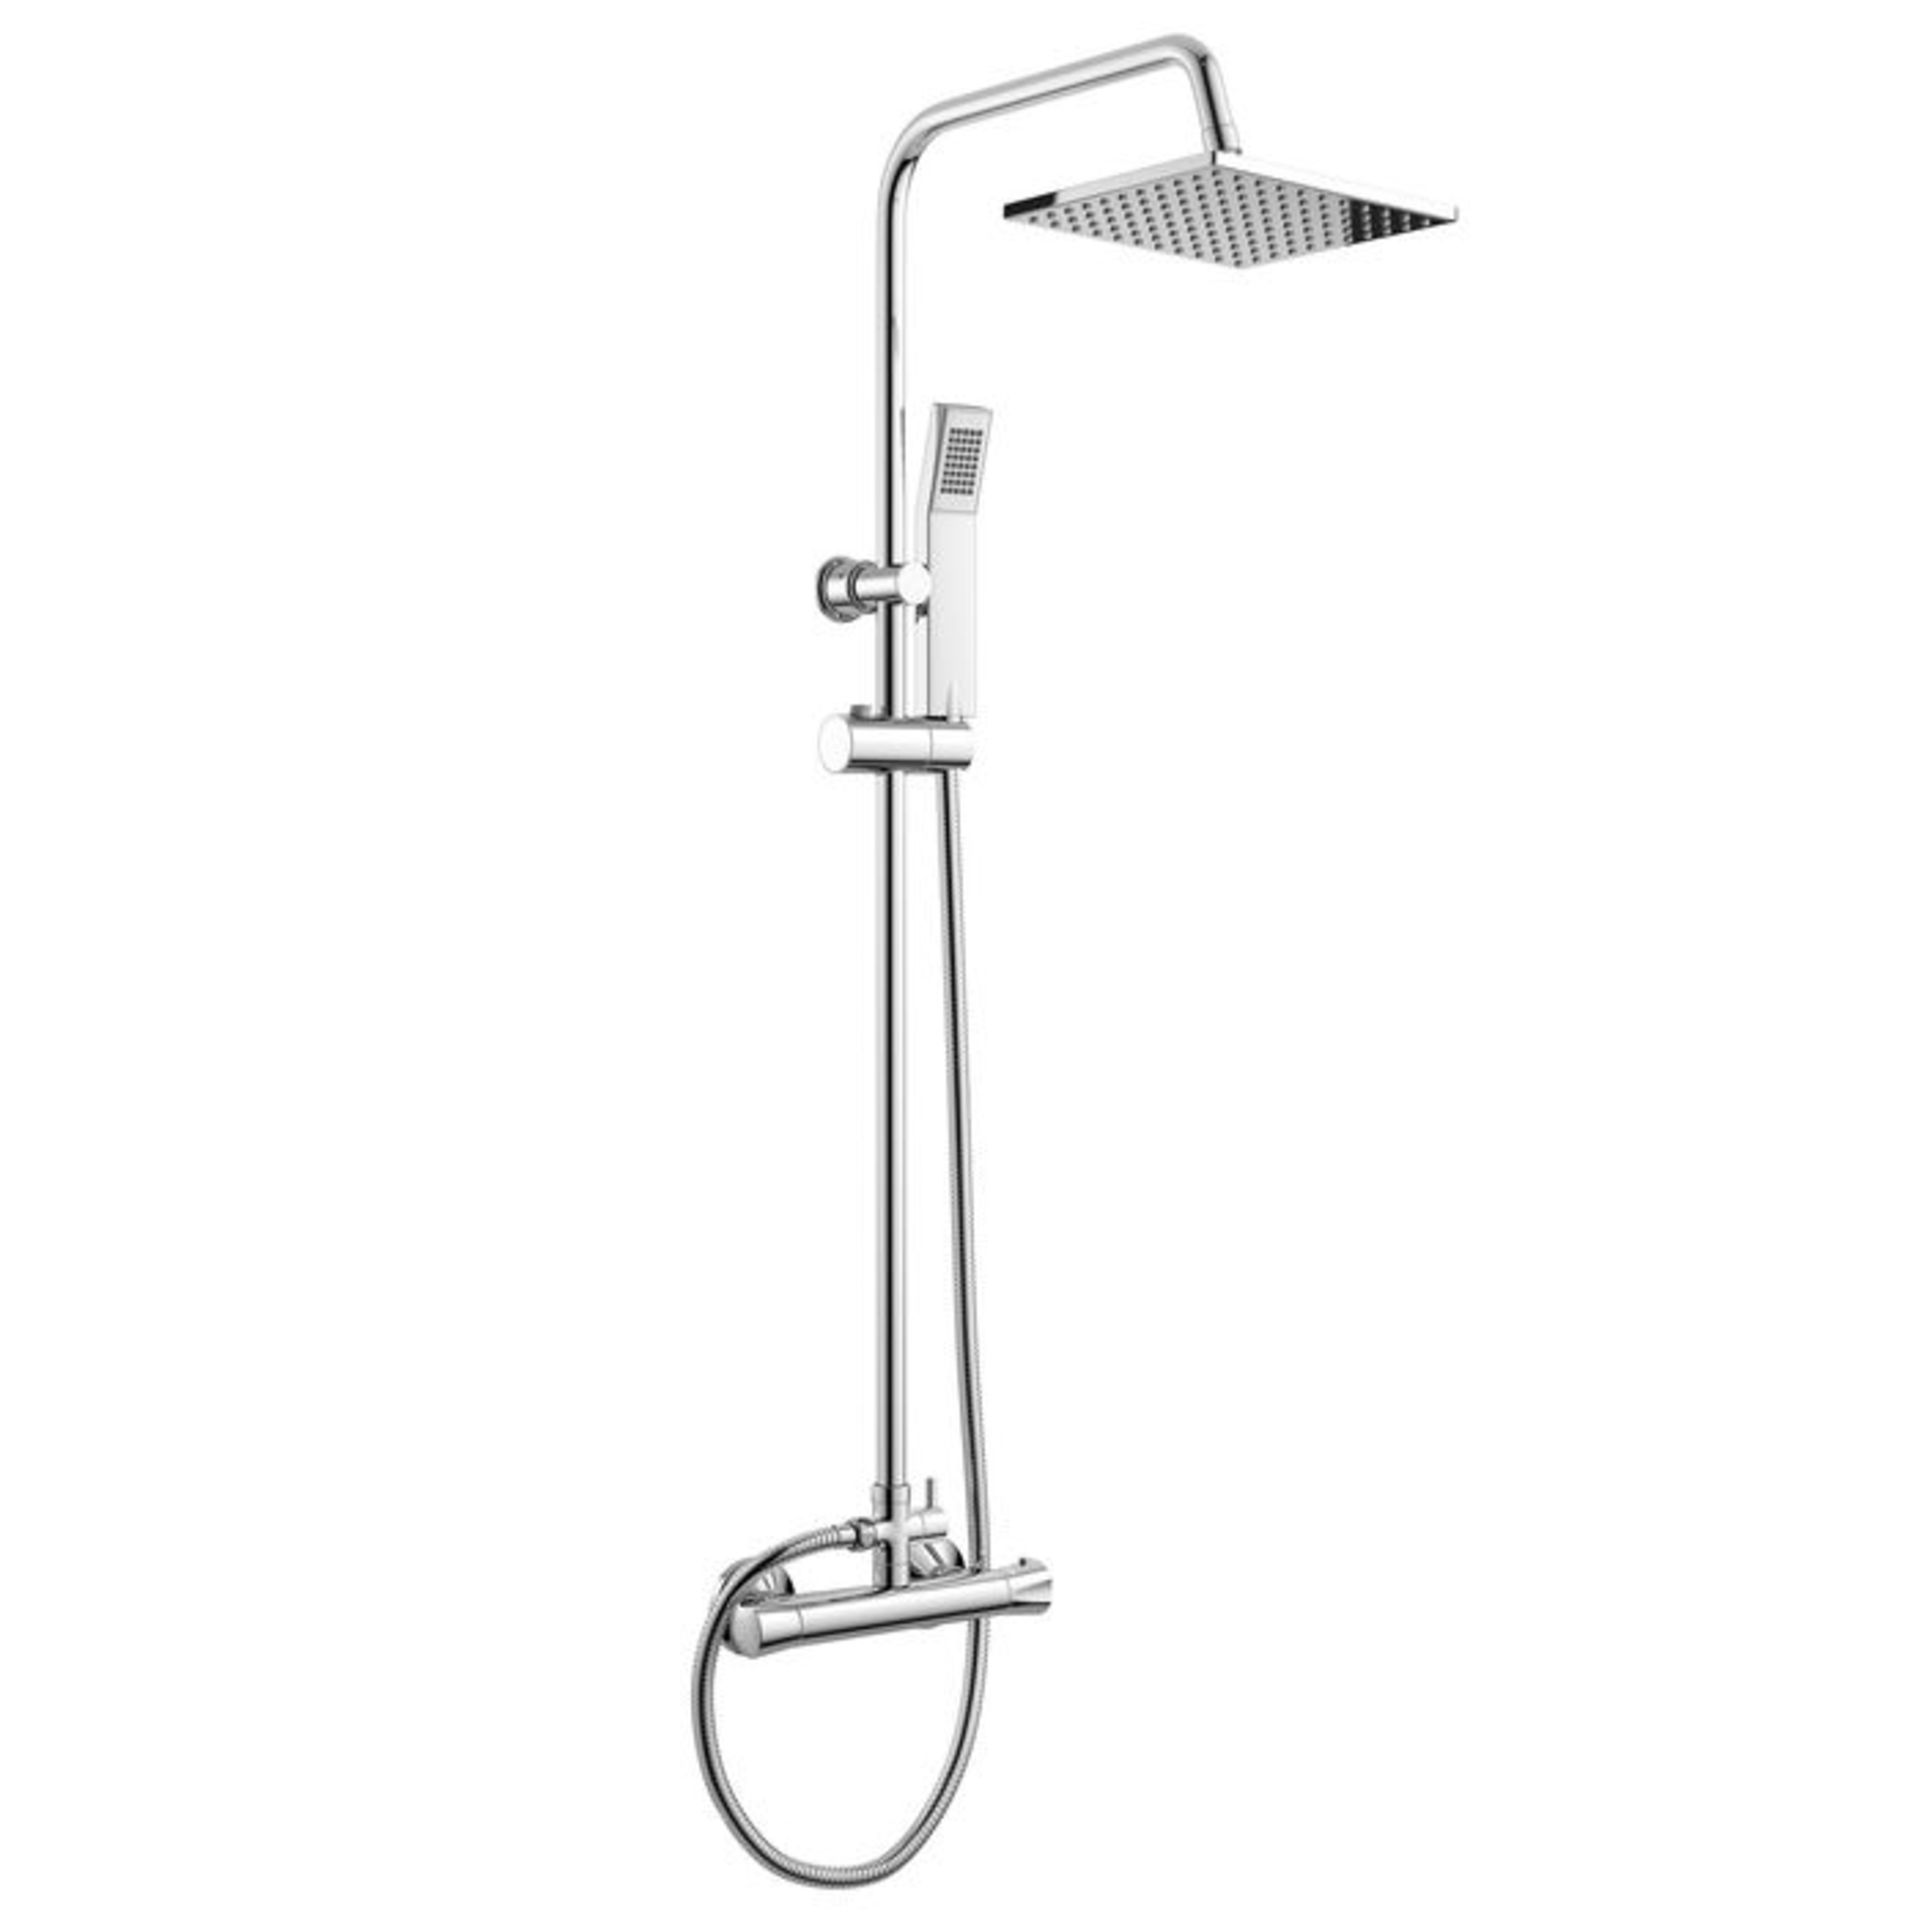 (MC138) Square Exposed Thermostatic Shower Kit & Head. Curved features and contemporary rounded